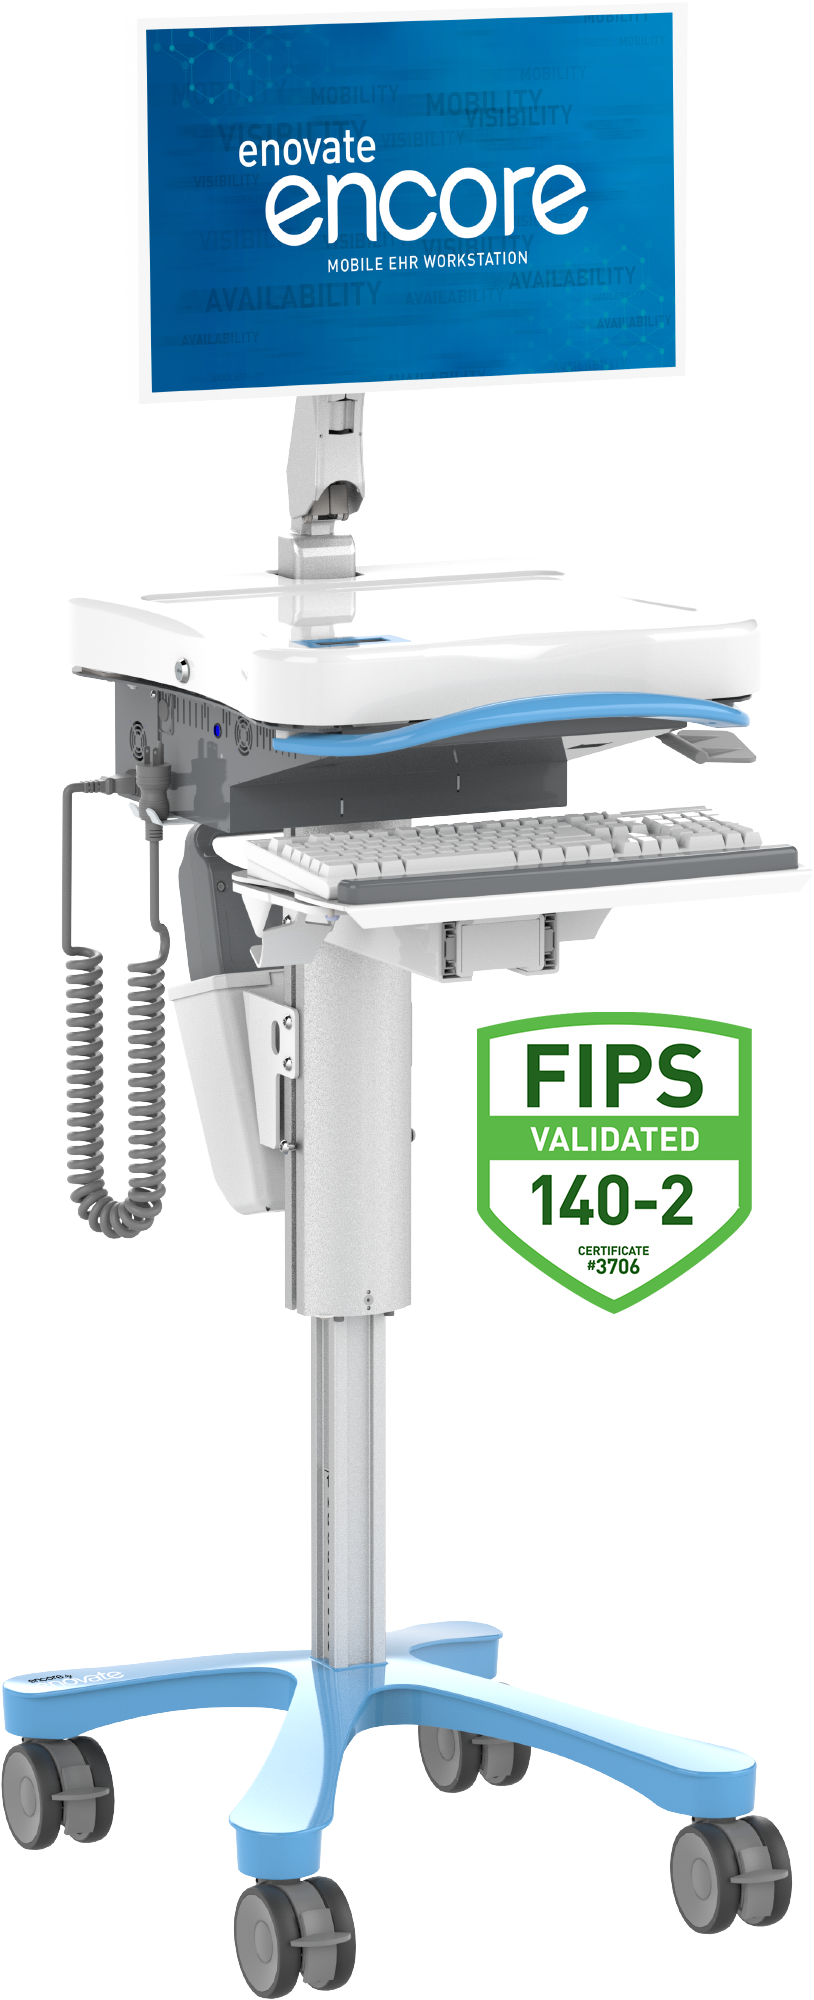 FIPS Validated Enovate Medical Encore